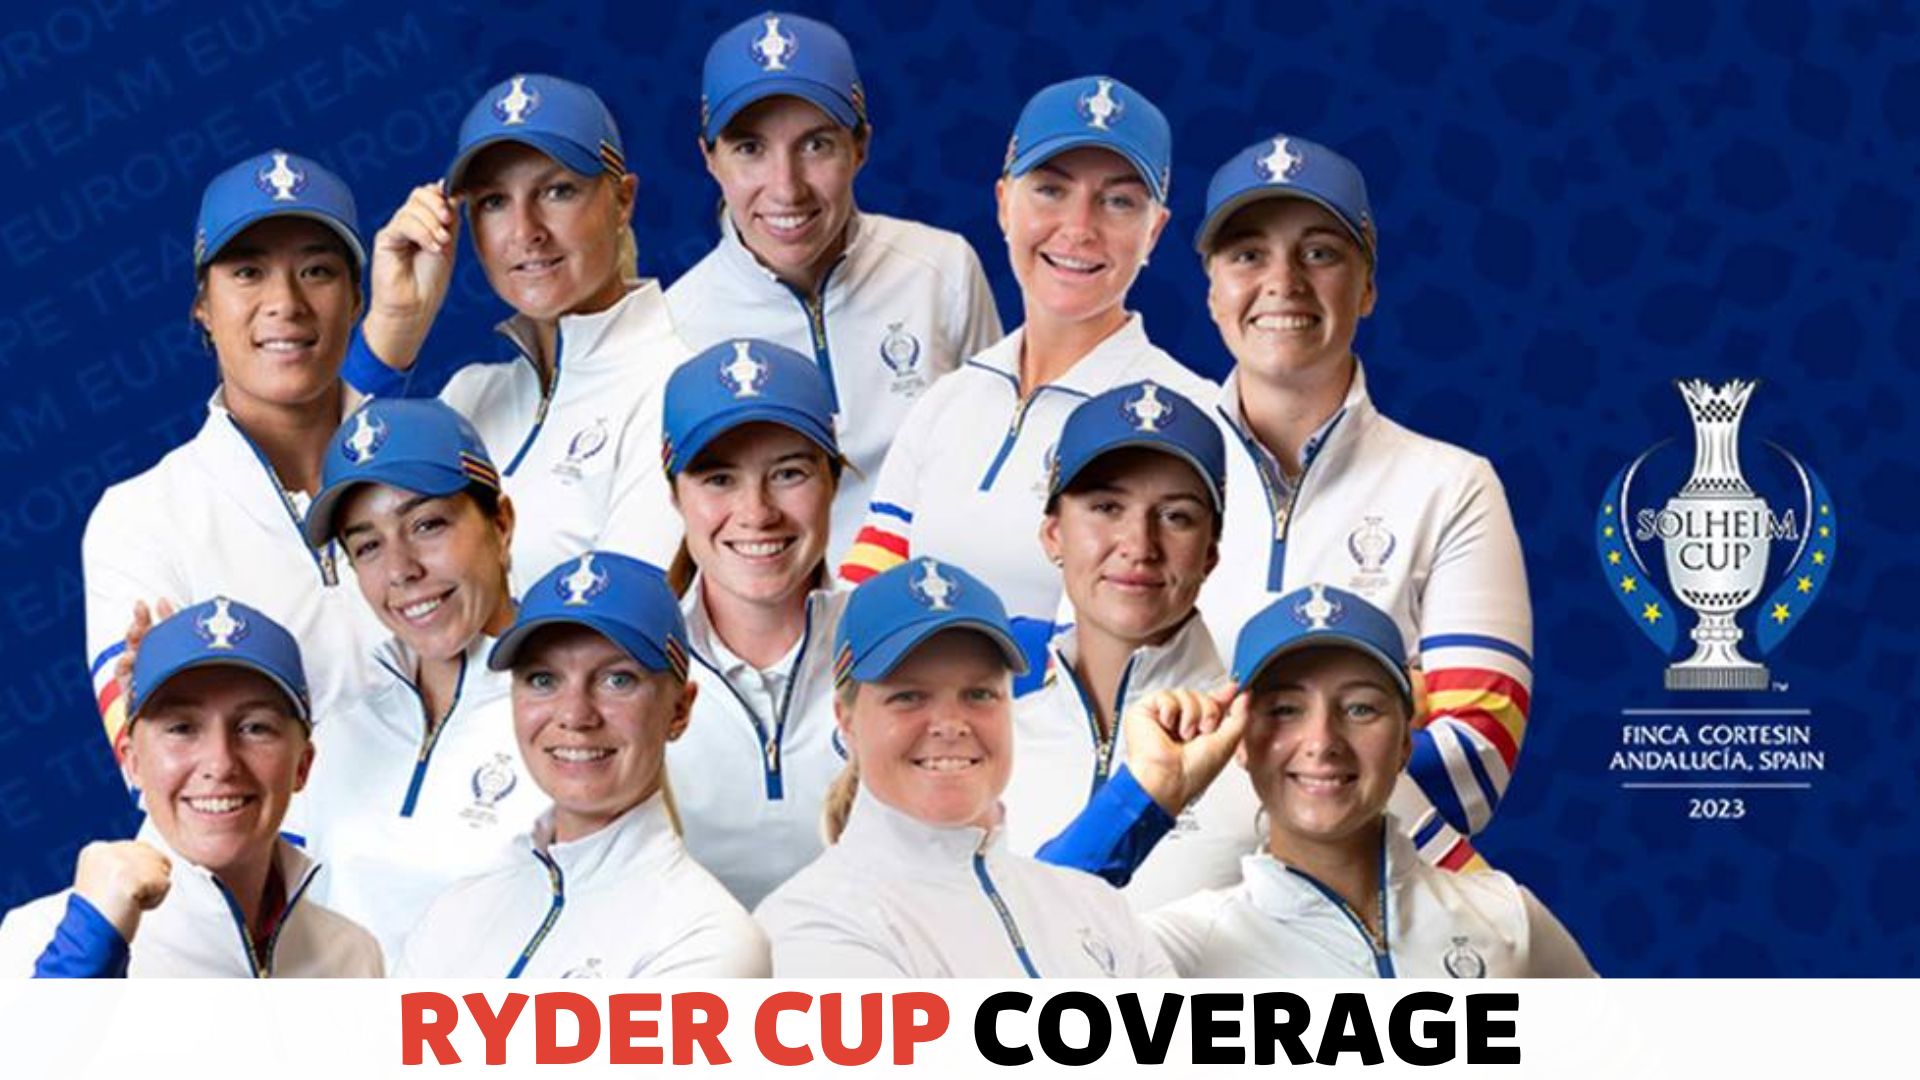 How to Watch Solheim Cup 2023